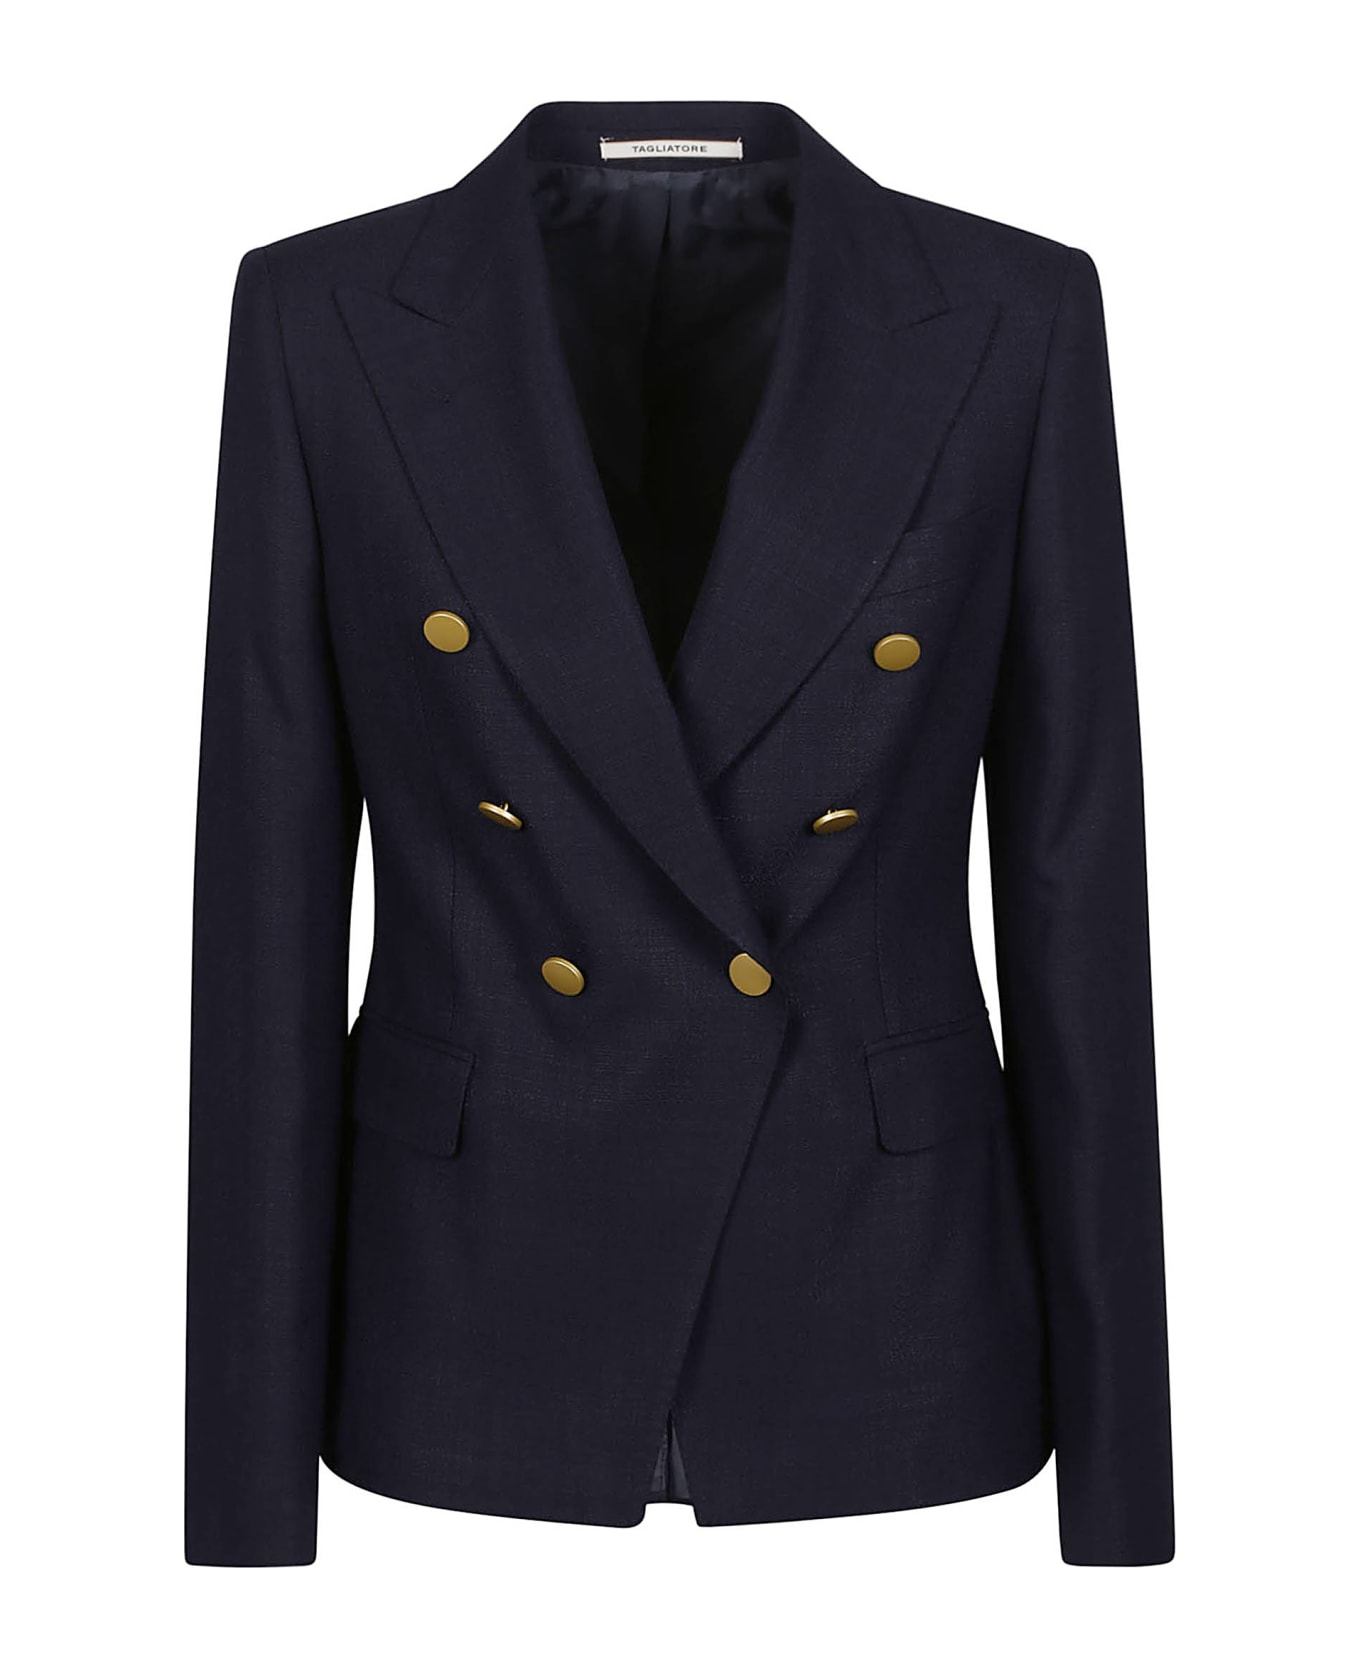 Tagliatore Double Breasted Jacket - Navy